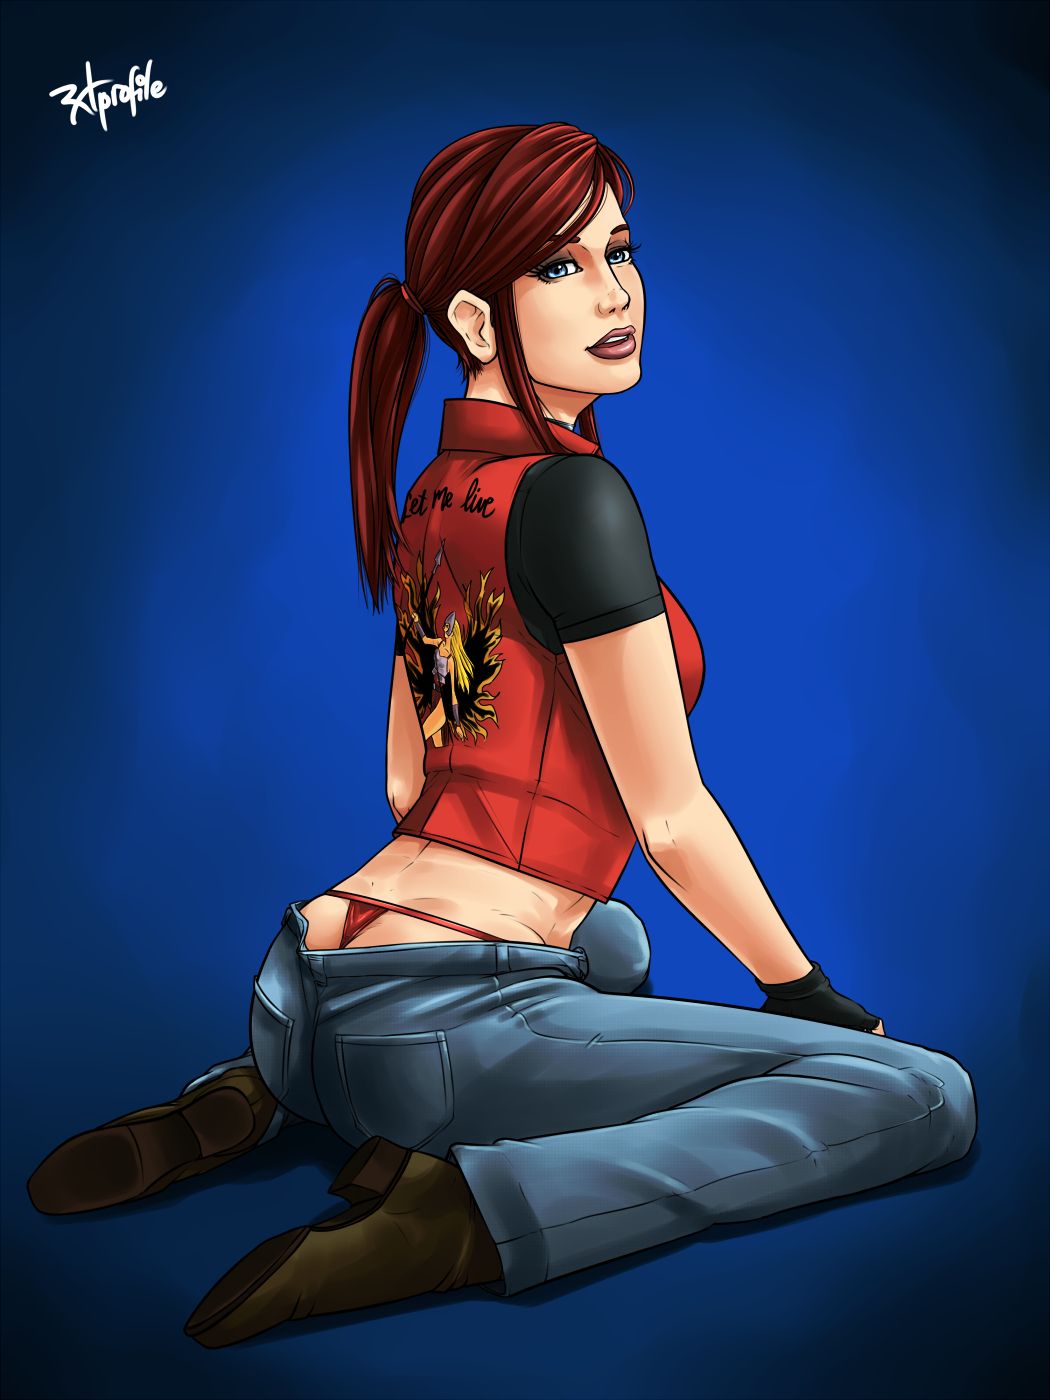 Claire redfield treesome animation wsound image